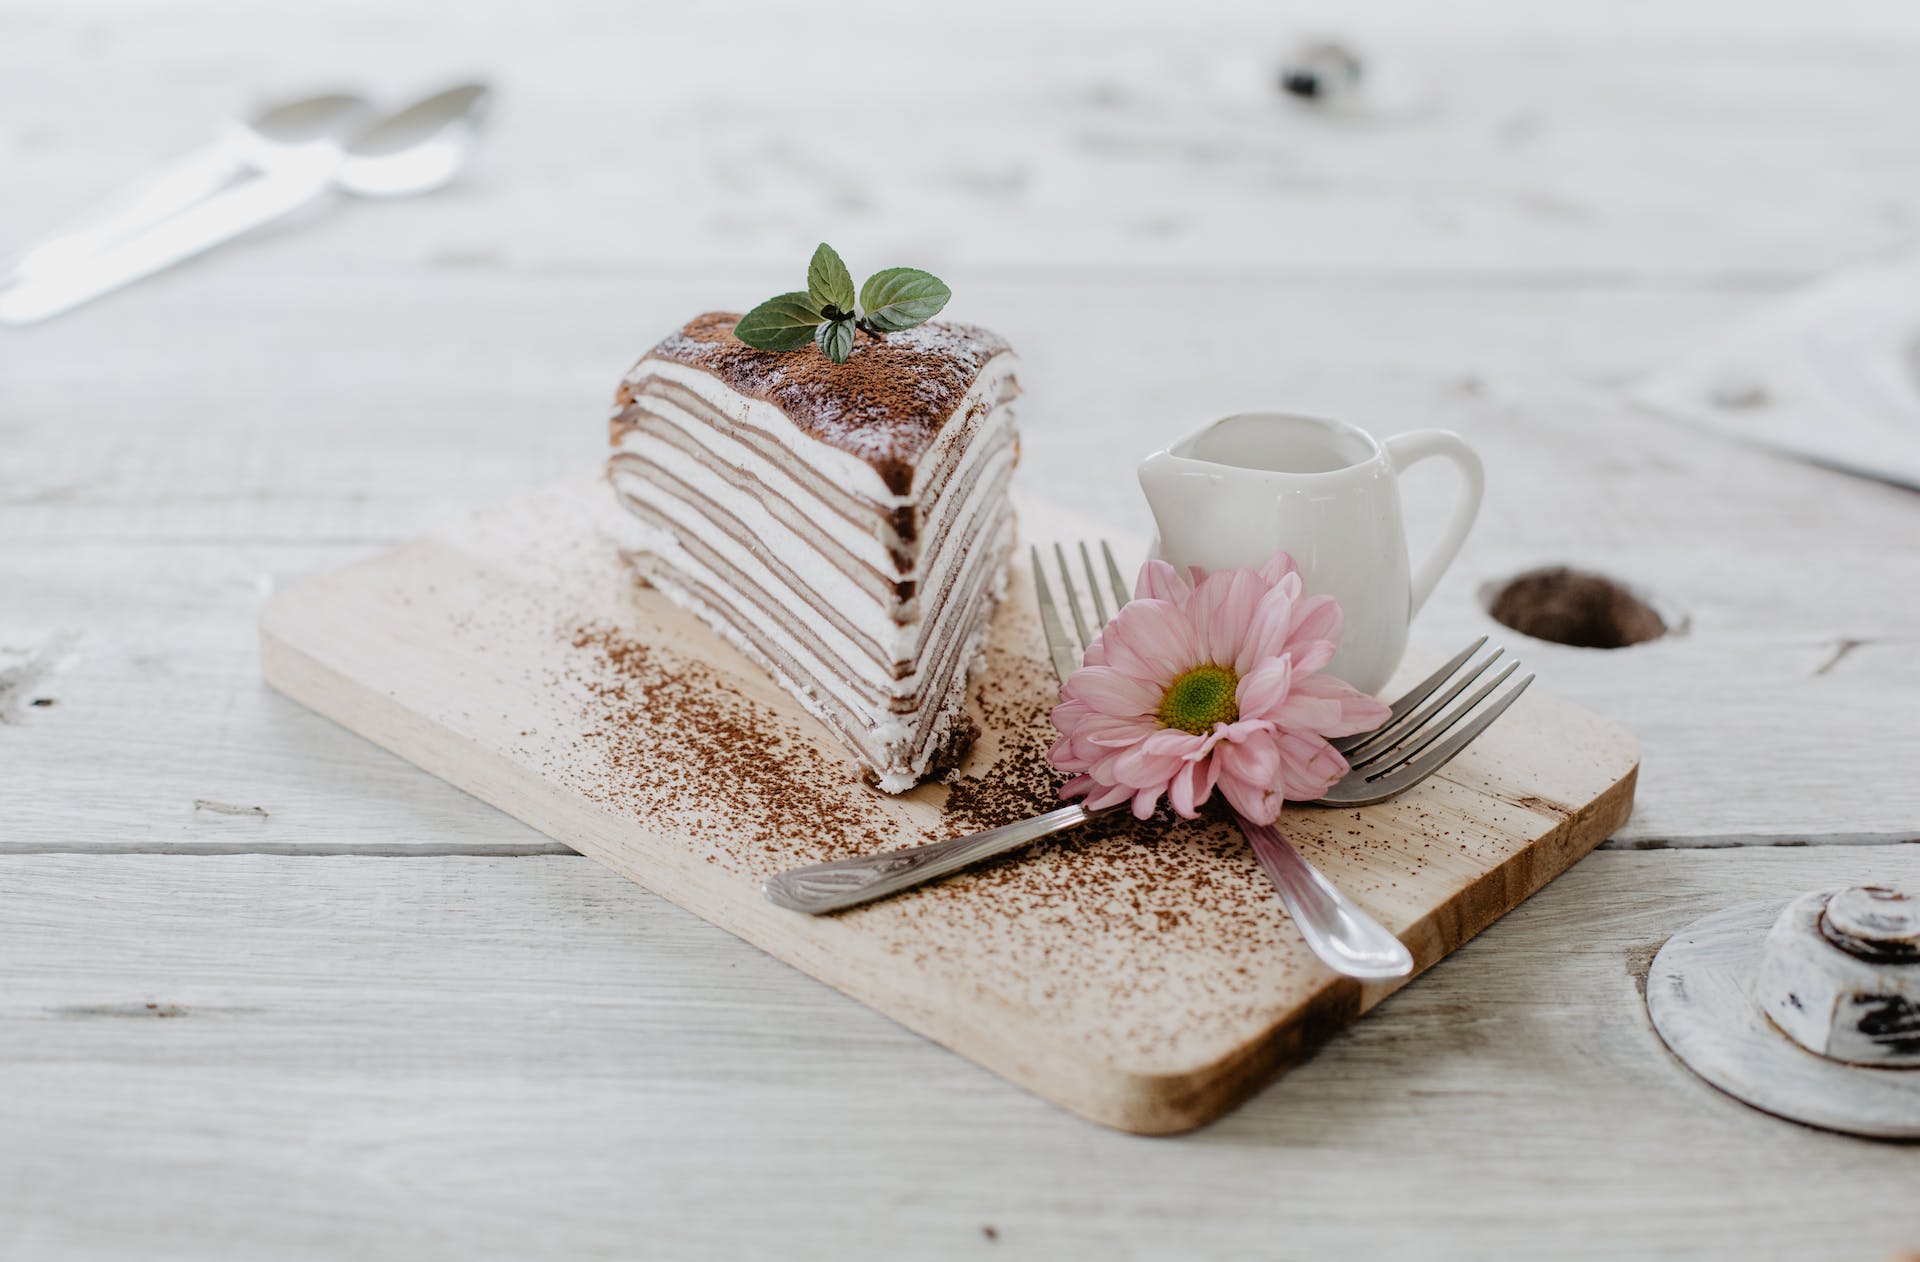 Slice of cake on table | Source: Pexels